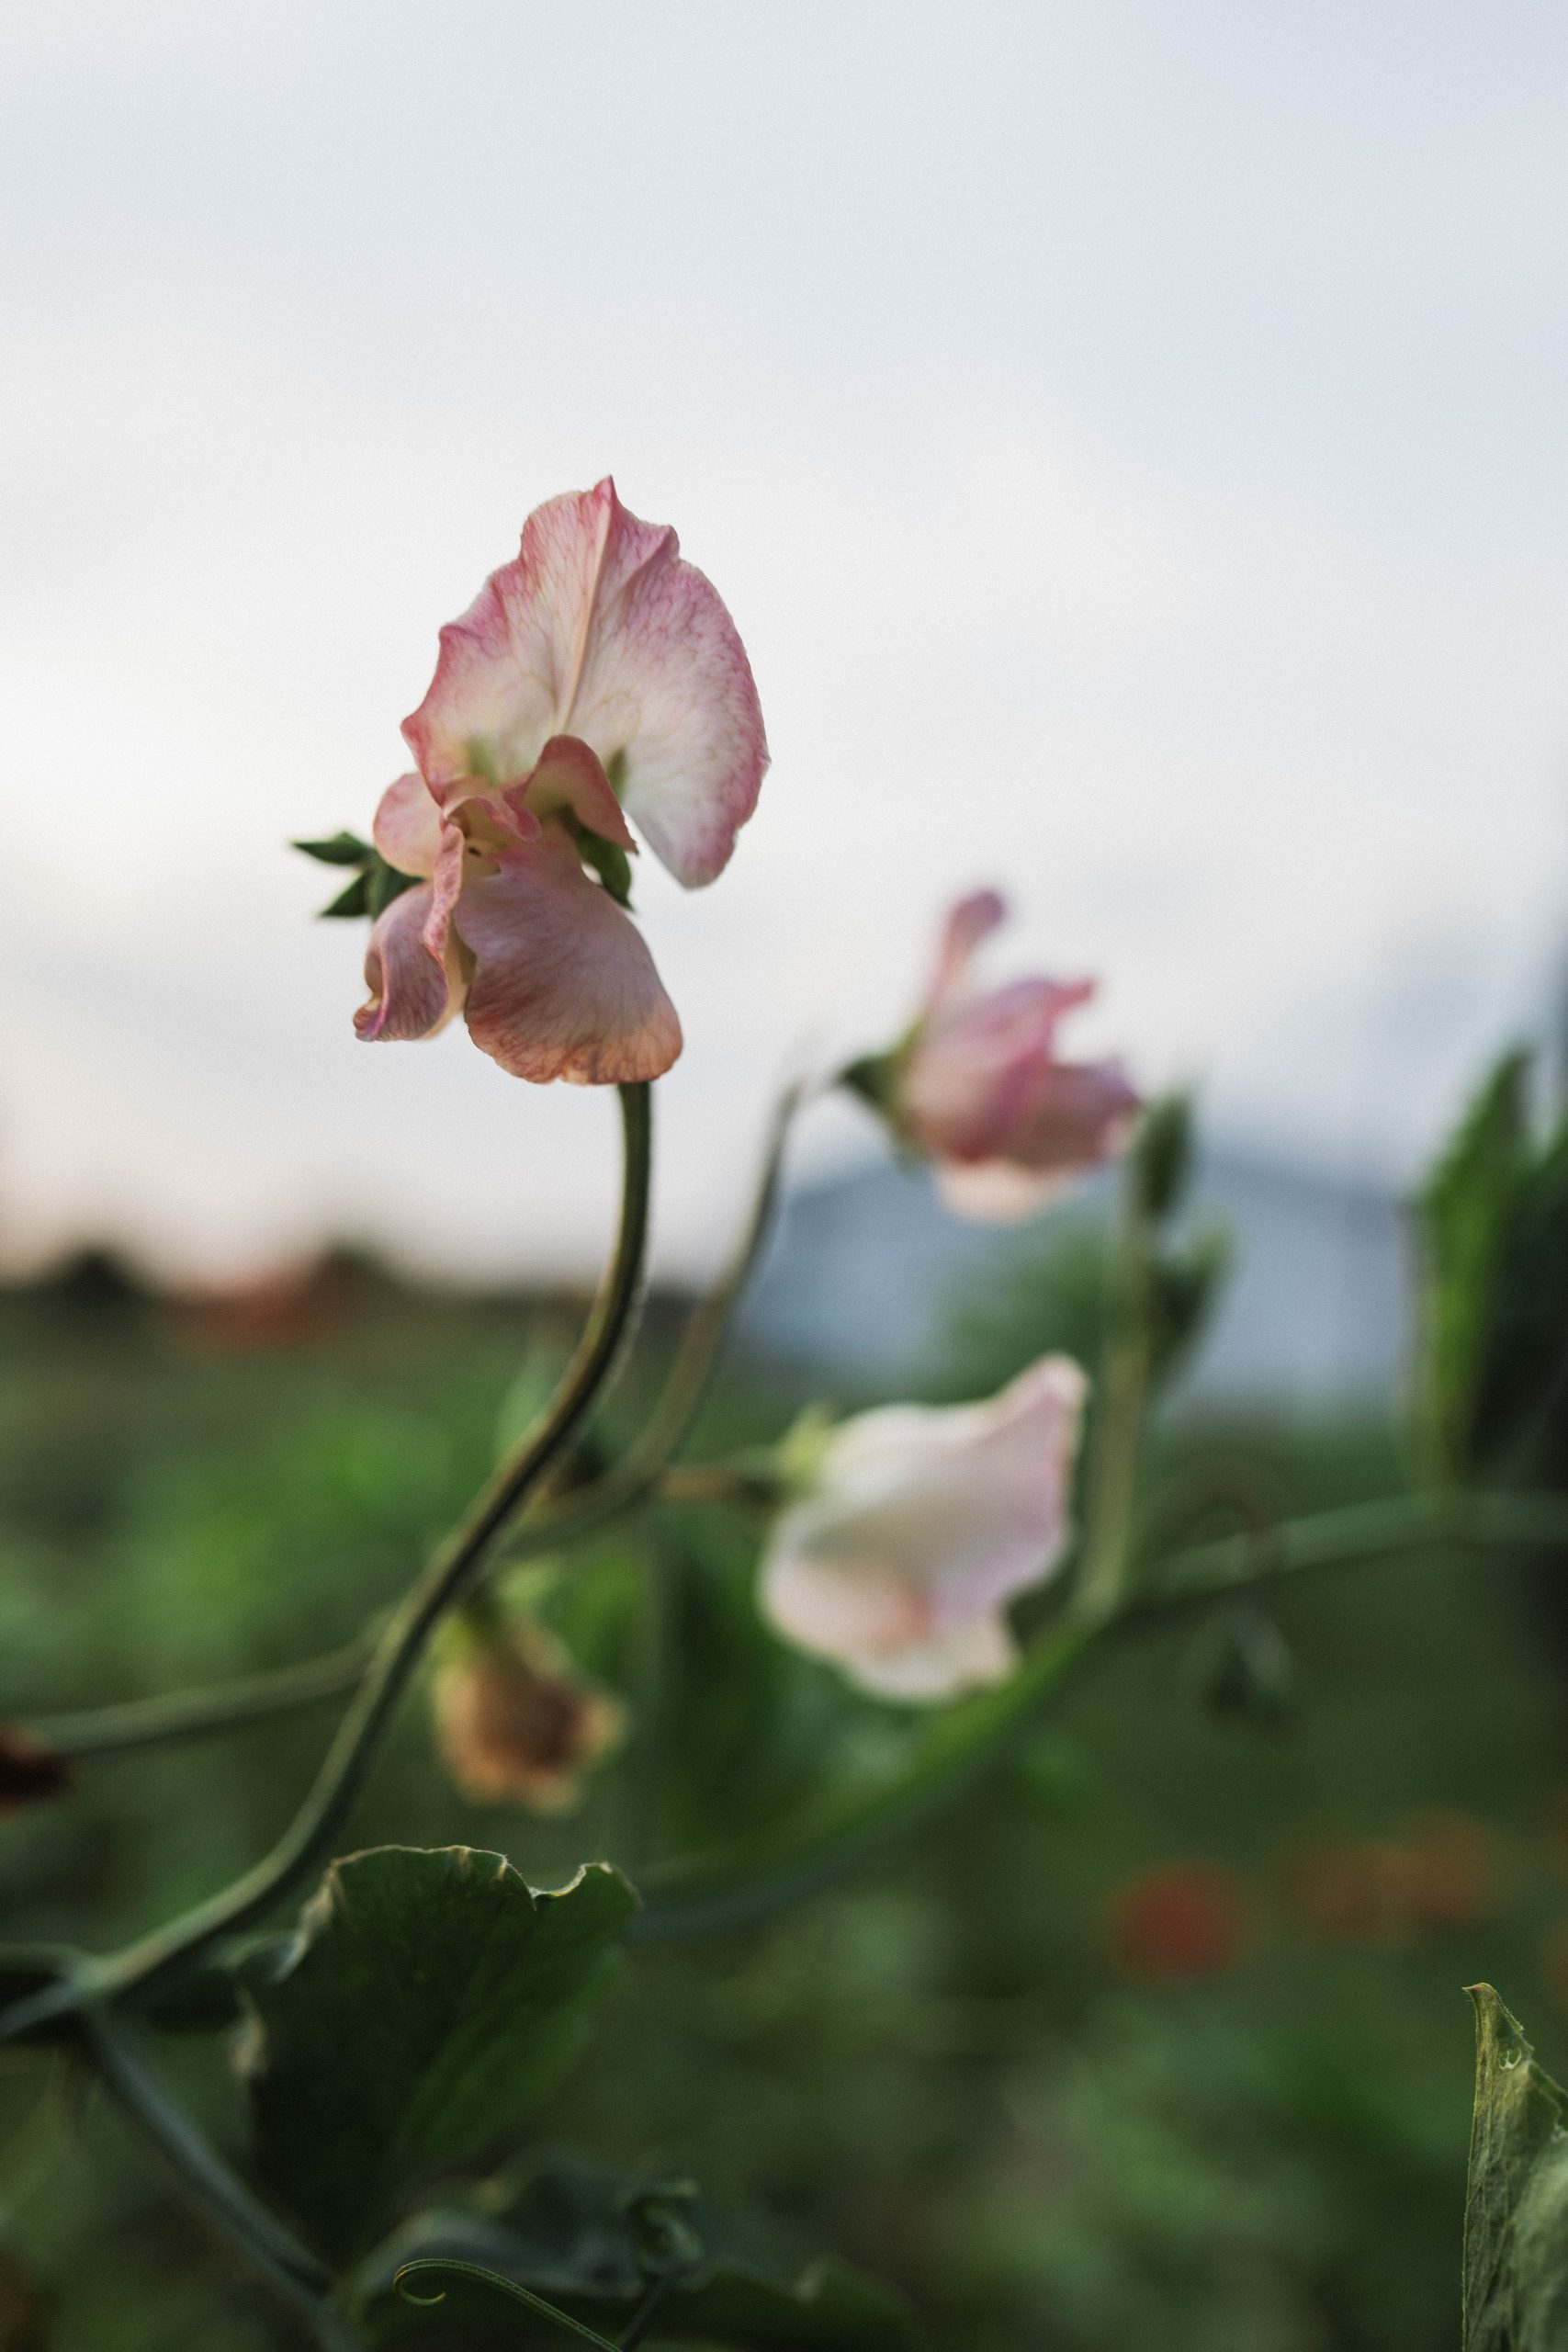 Sweet Pea Seeds and Other Cut Flower Seed Sources